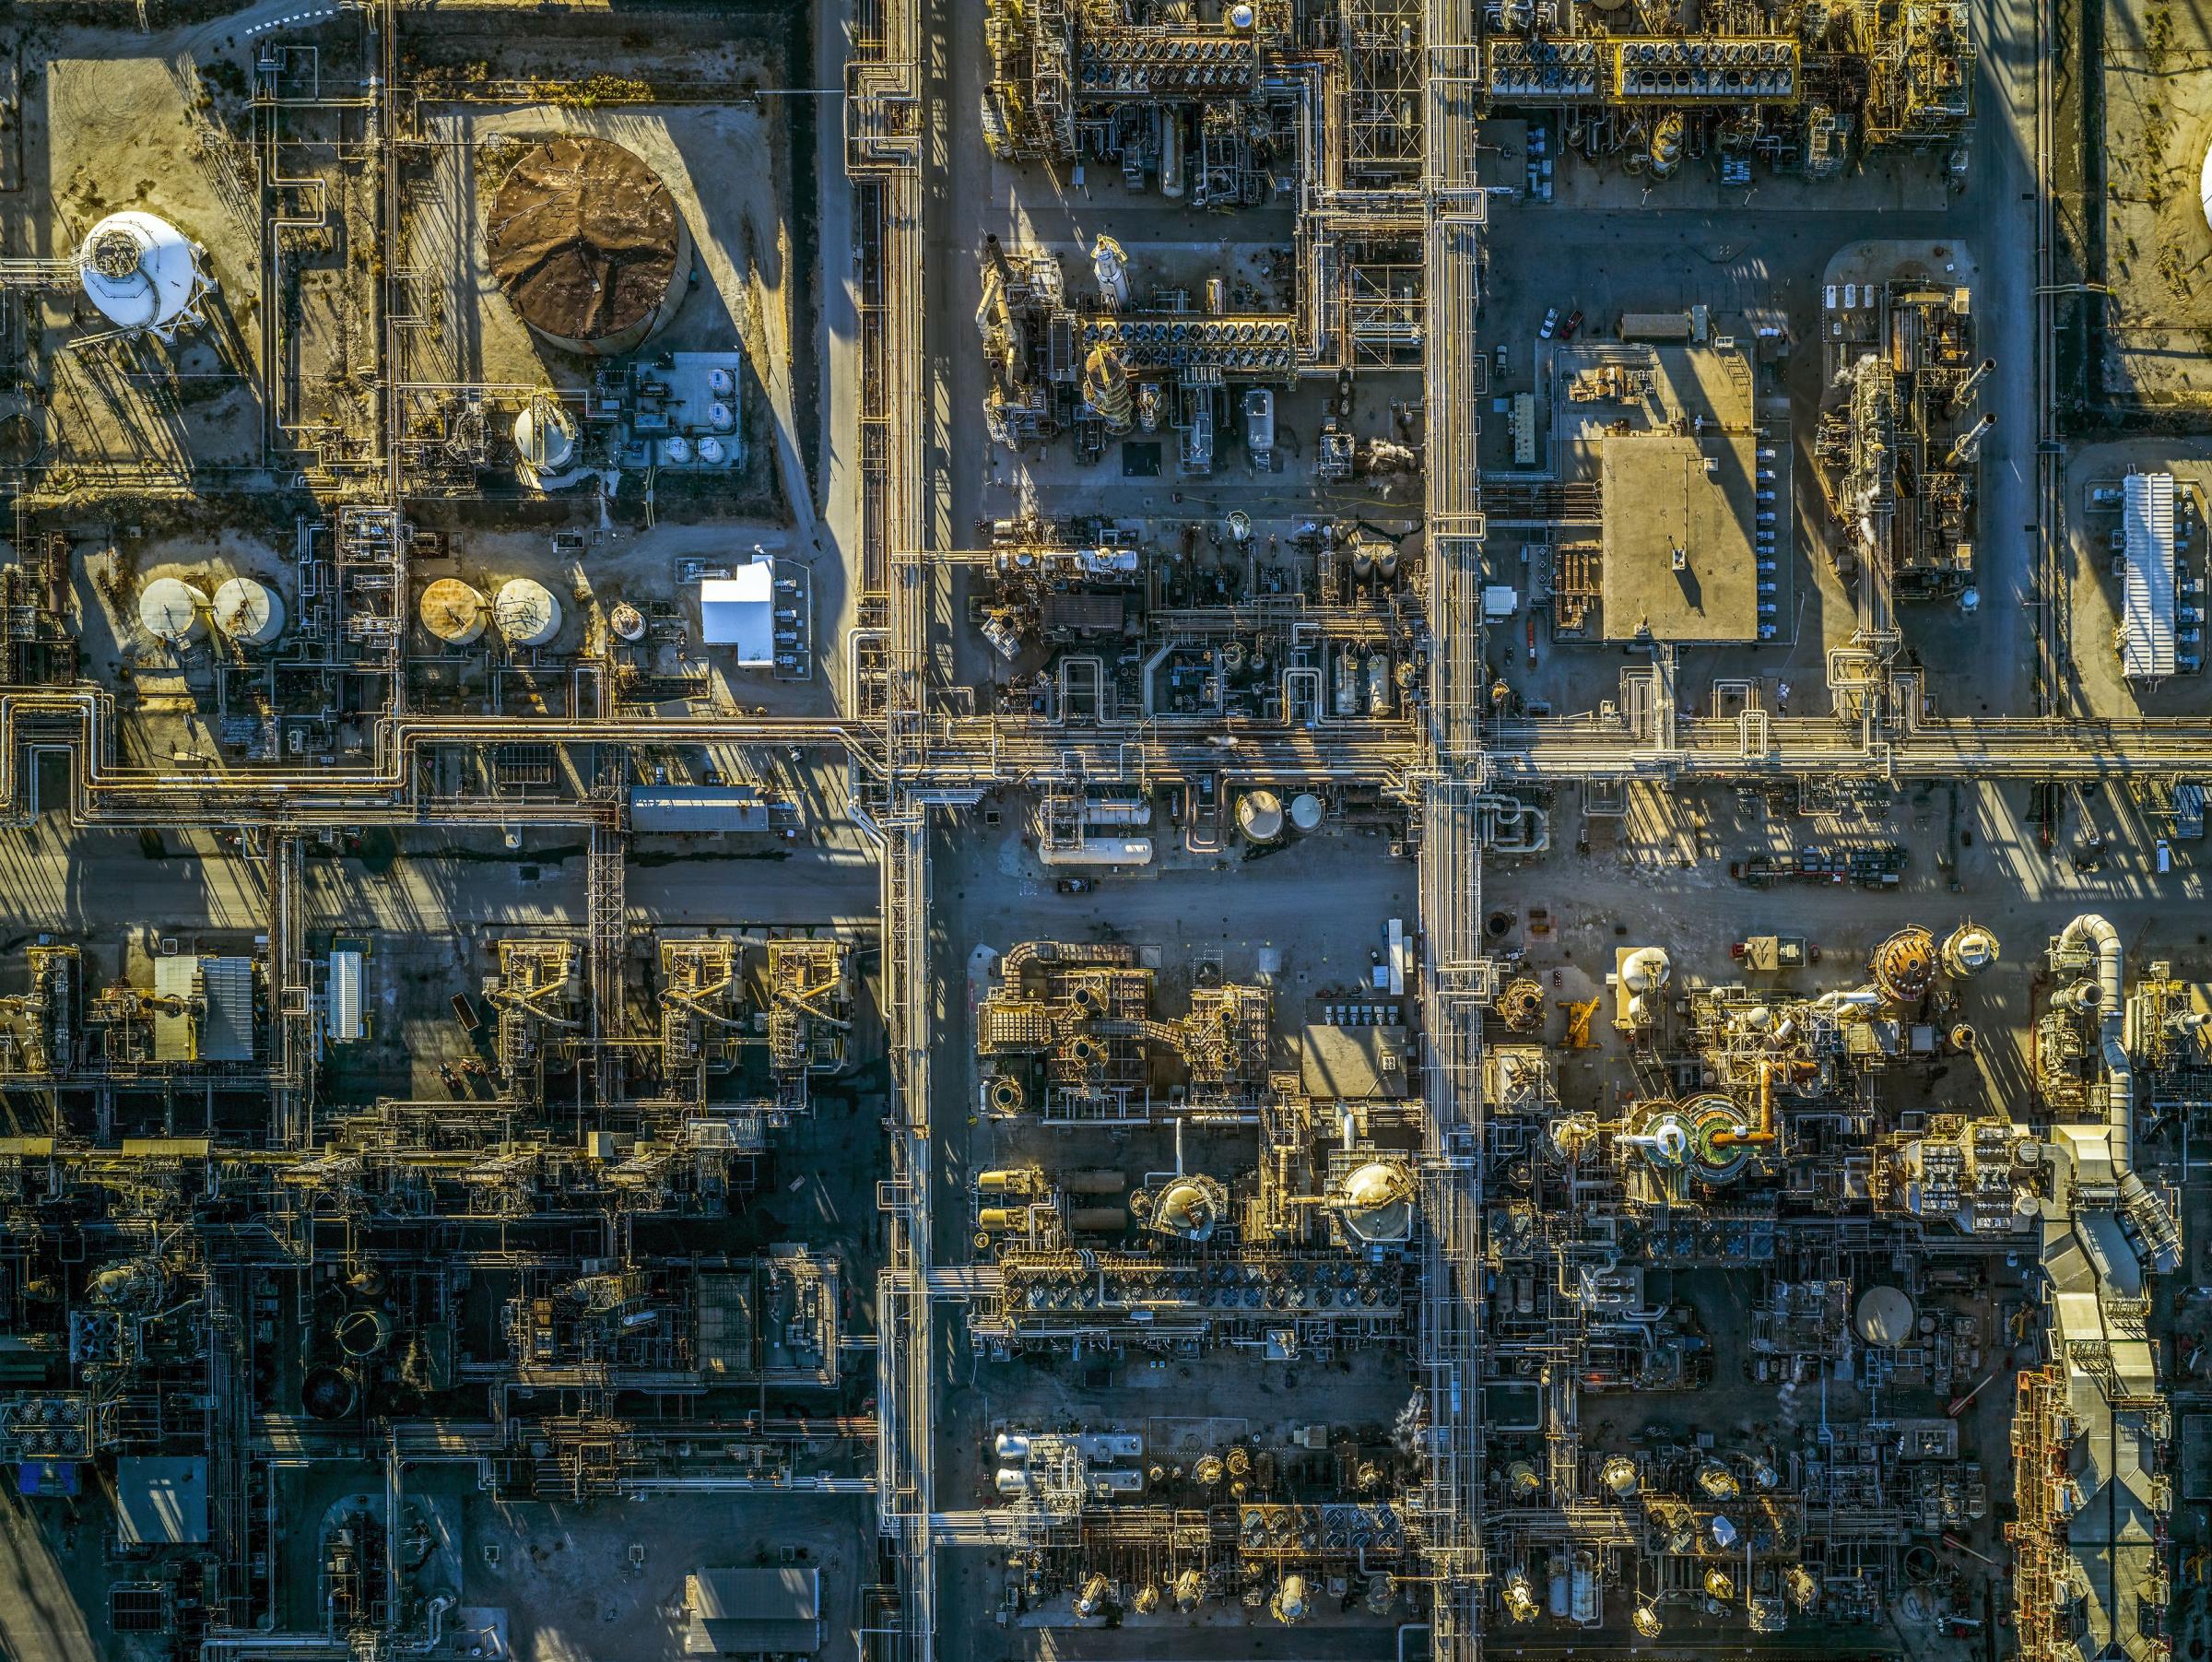 Refineries and ports aerial photographs, America - 2016